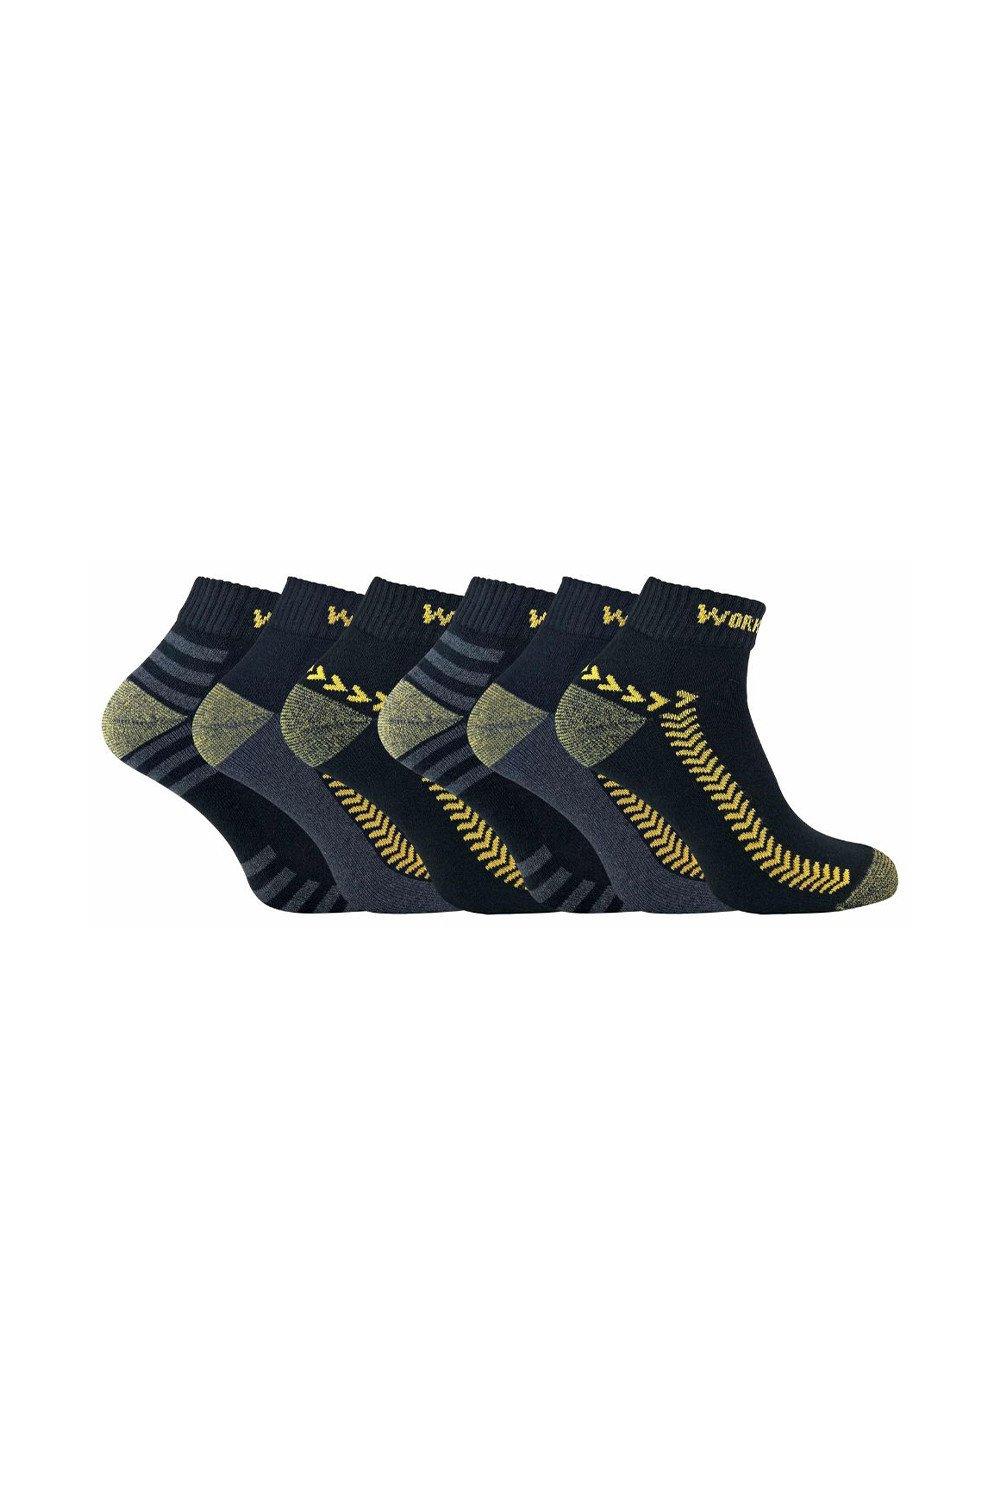 6 Pairs Breathable Low Cut Work Socks with Reinforced Heel & Toe